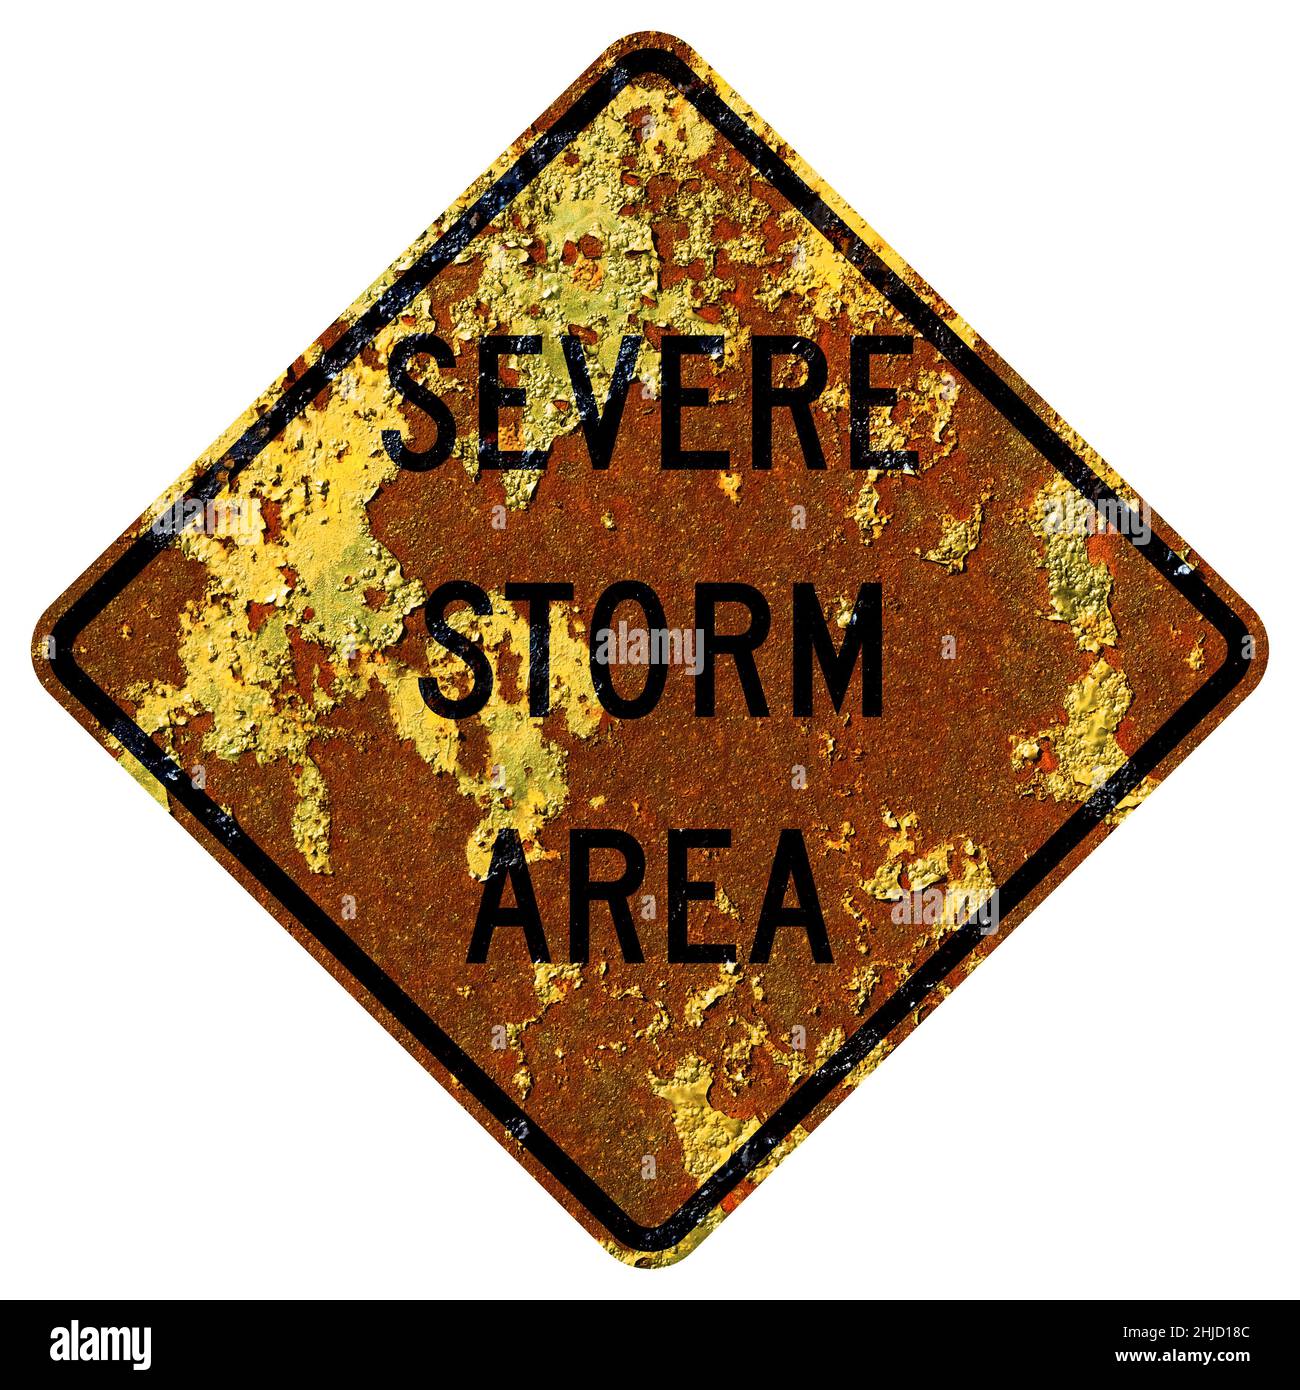 Old rusty American road sign - Severe storm area, Idaho Stock Photo